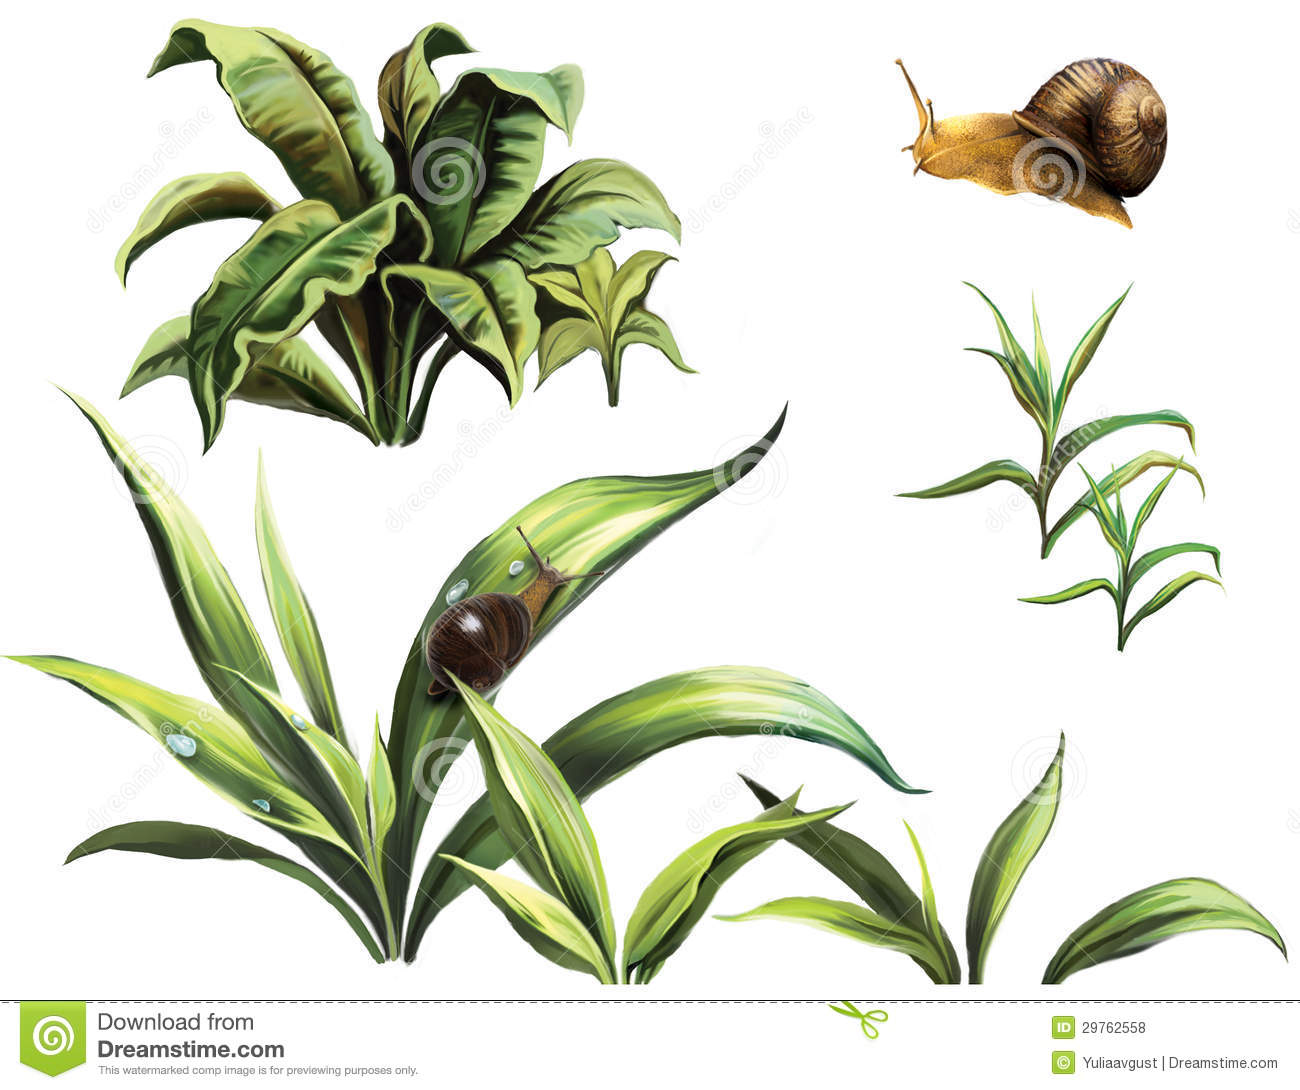 Wild Plants And Snails Isolated Realistic Illustration On White